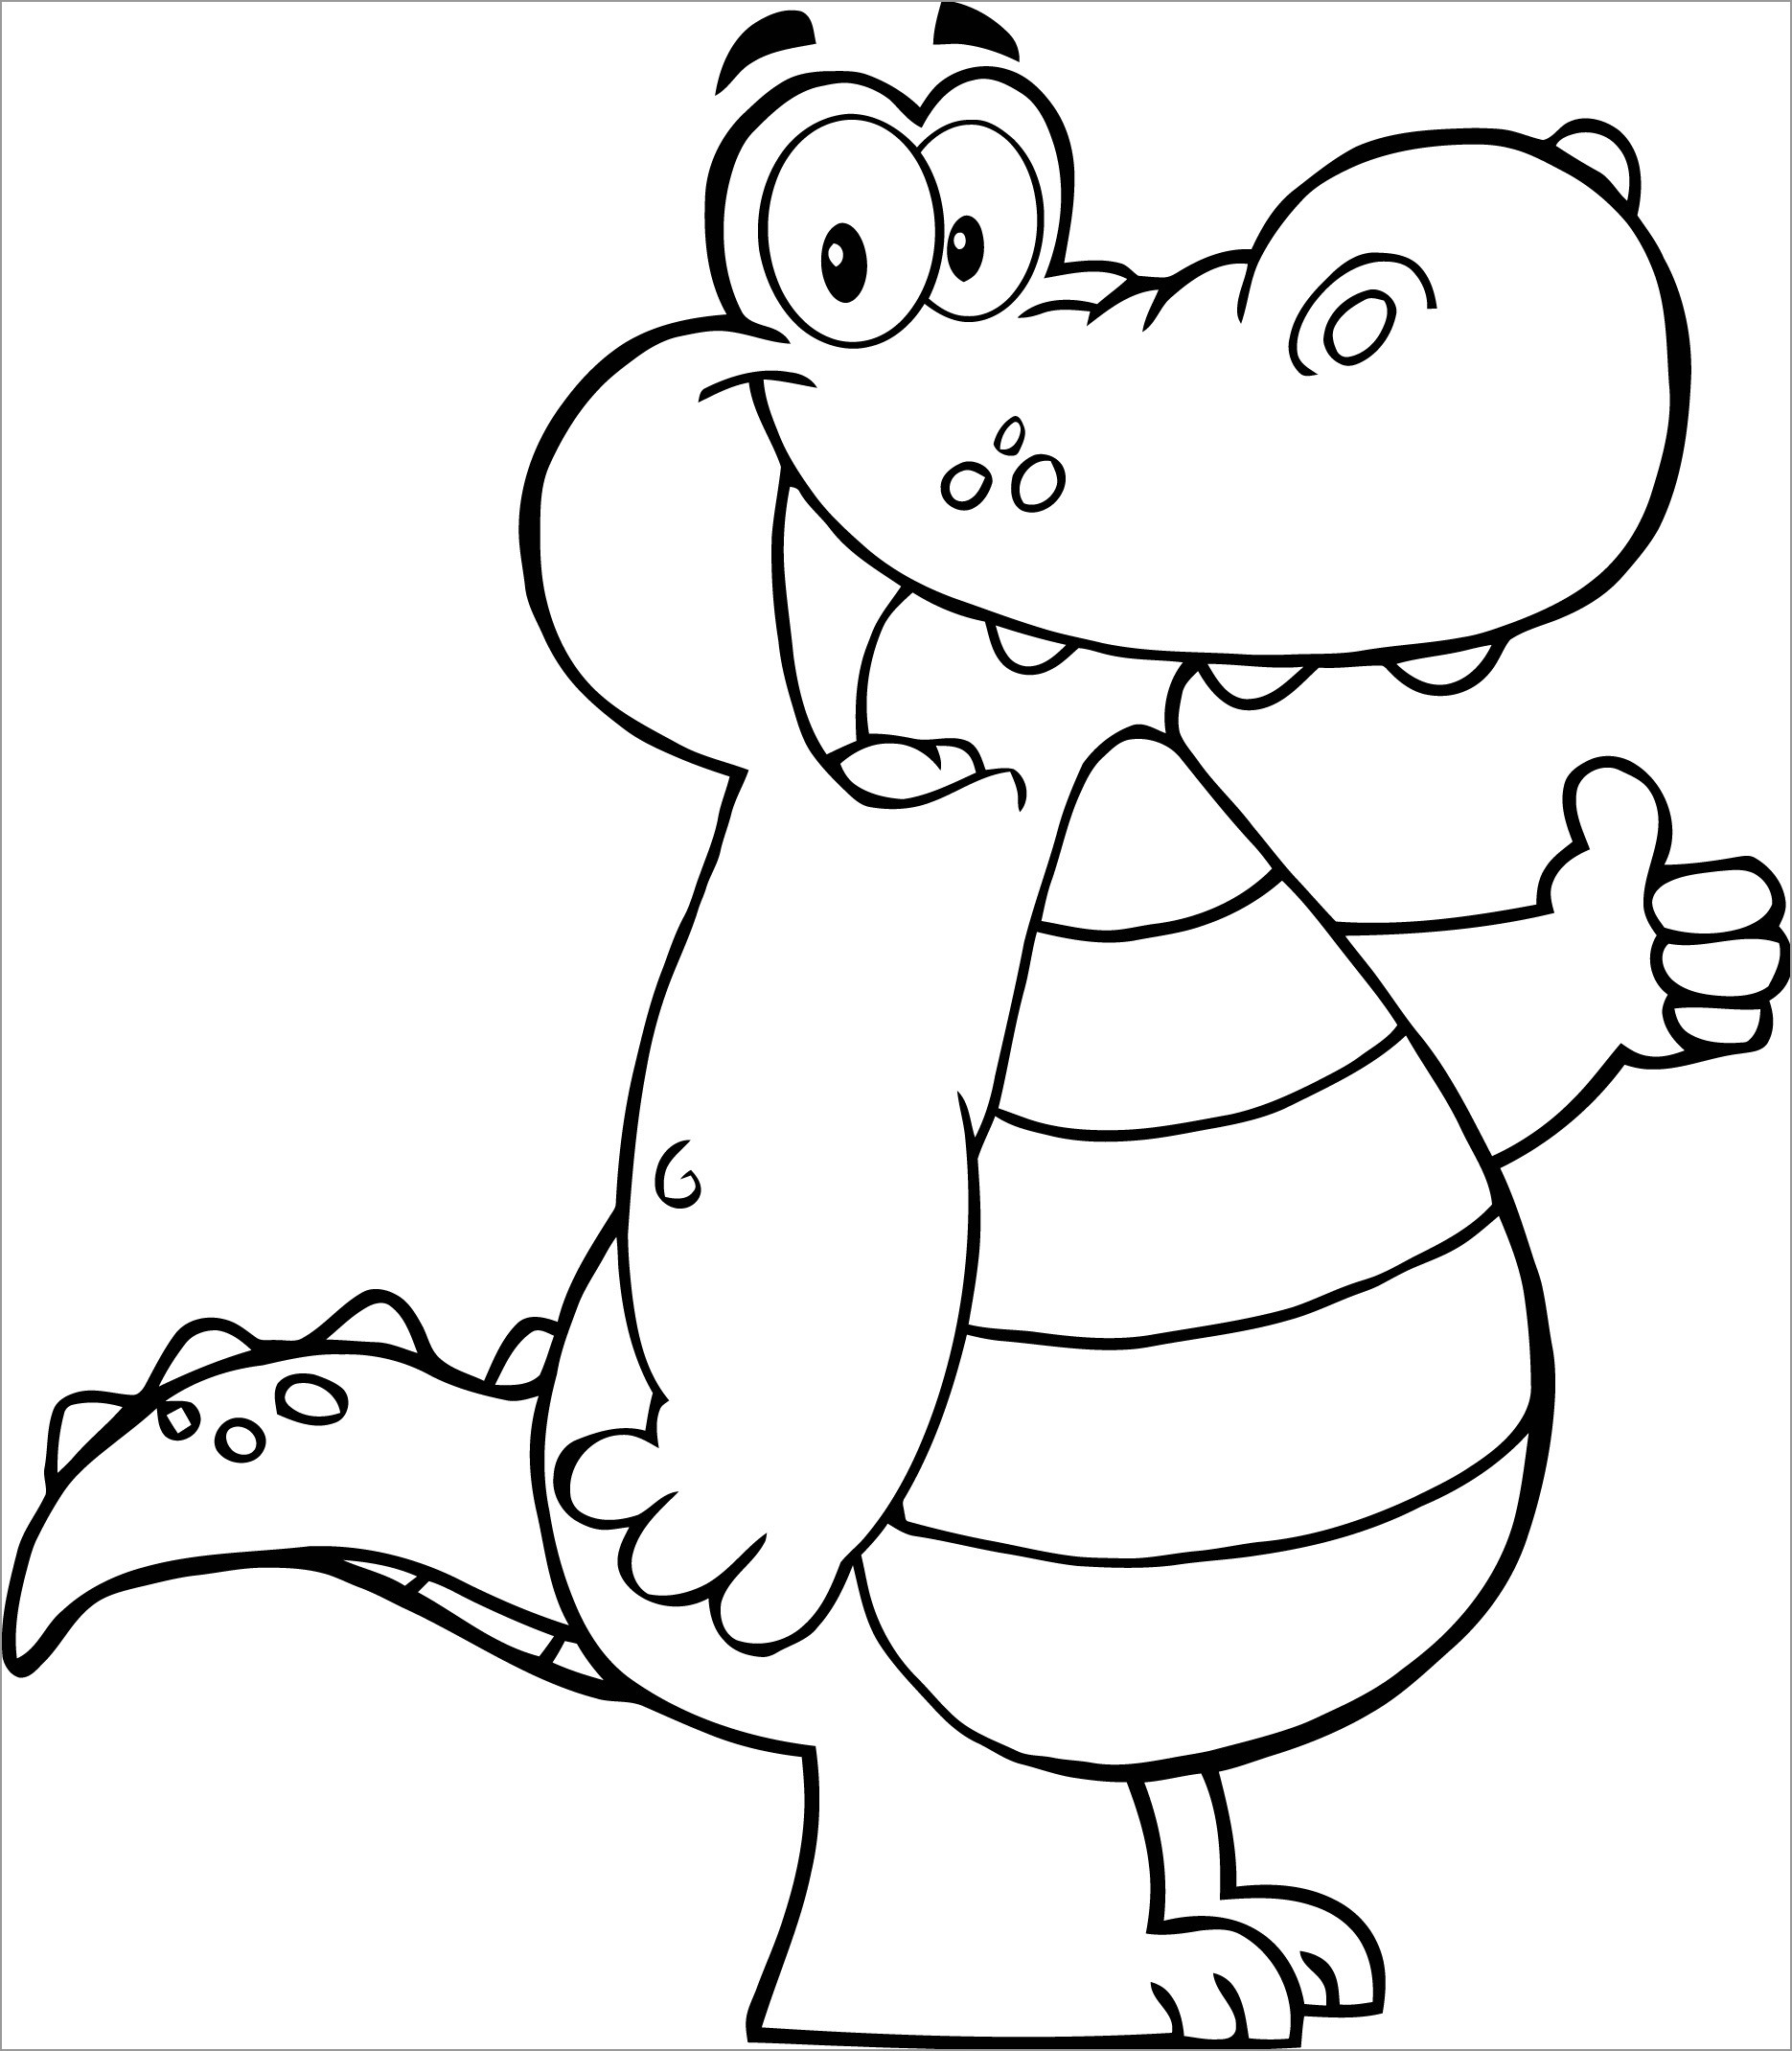 Alligator Showing Thumbs Up Coloring Page